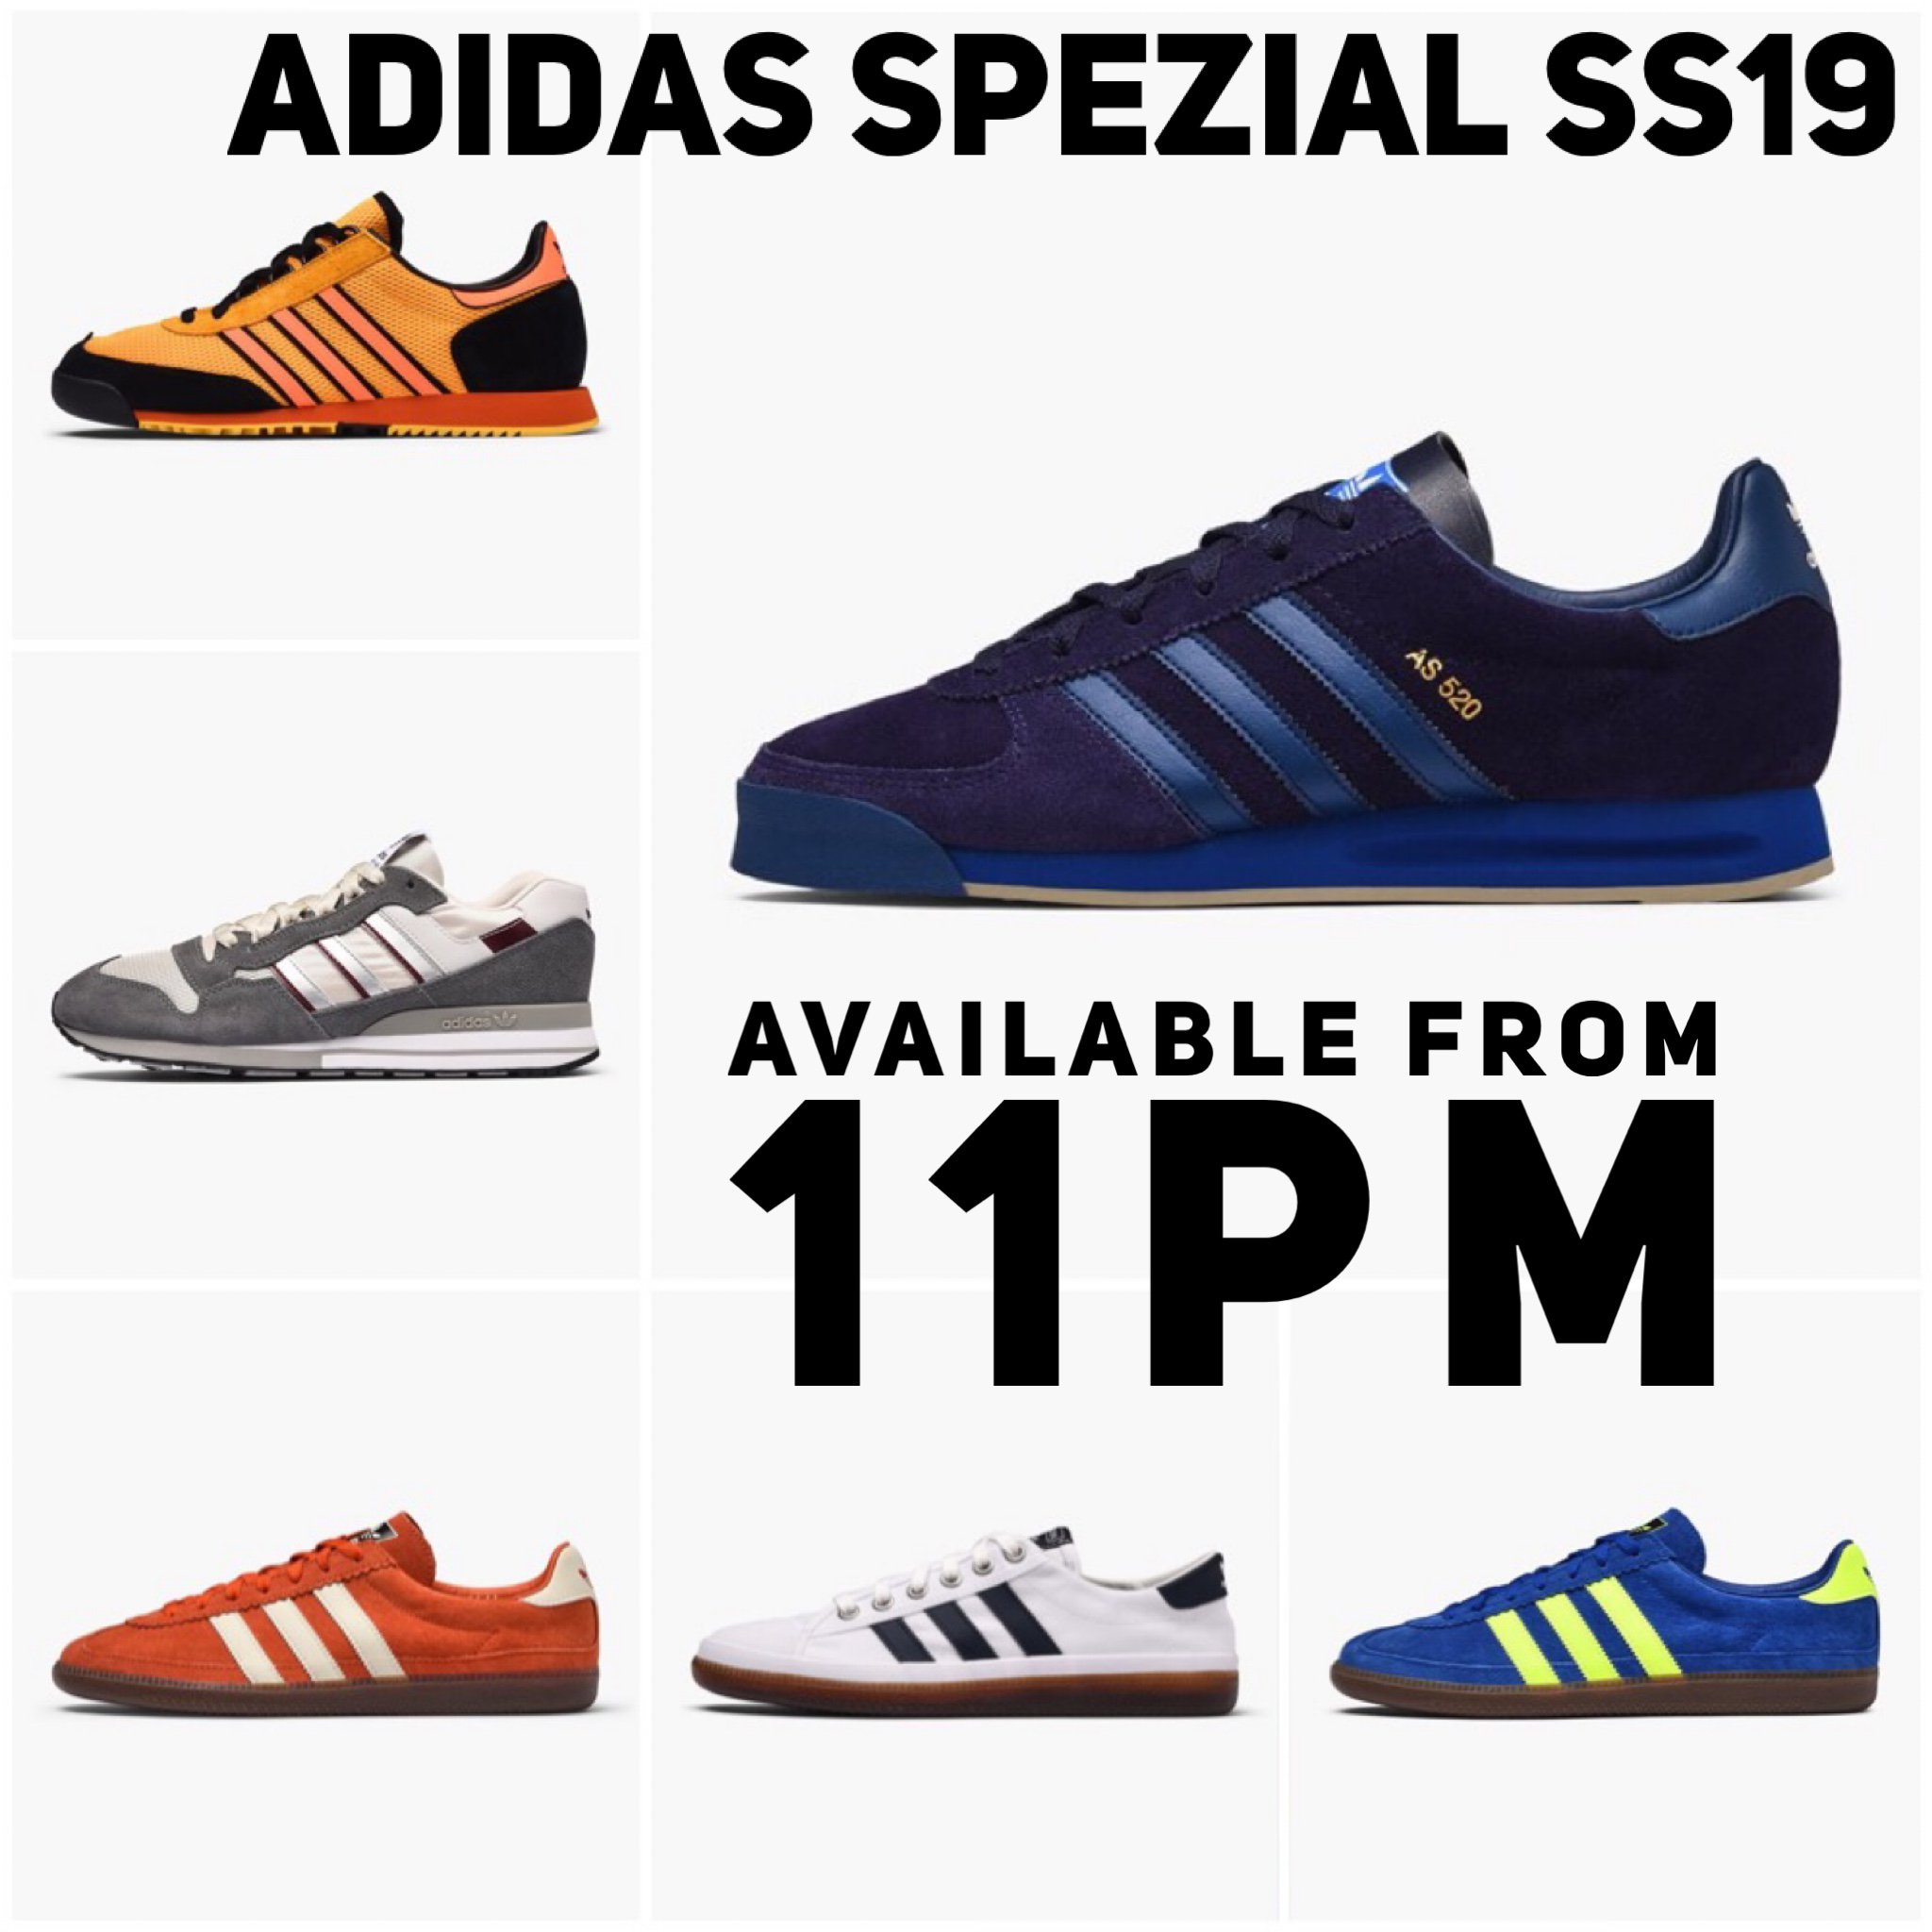 Motivere stof retfærdig The Casuals Directory on X: "Adidas Spezial SS19 Available tonight at 11pm  from the following stockist 👇🏻👇🏻👇🏻 https://t.co/pQwswlmEOv be quick,  these will be shifting quickly /// #adidas #adidasspezialss19 #spzl  #sneakers https://t.co/9WmkwJYwd7" /